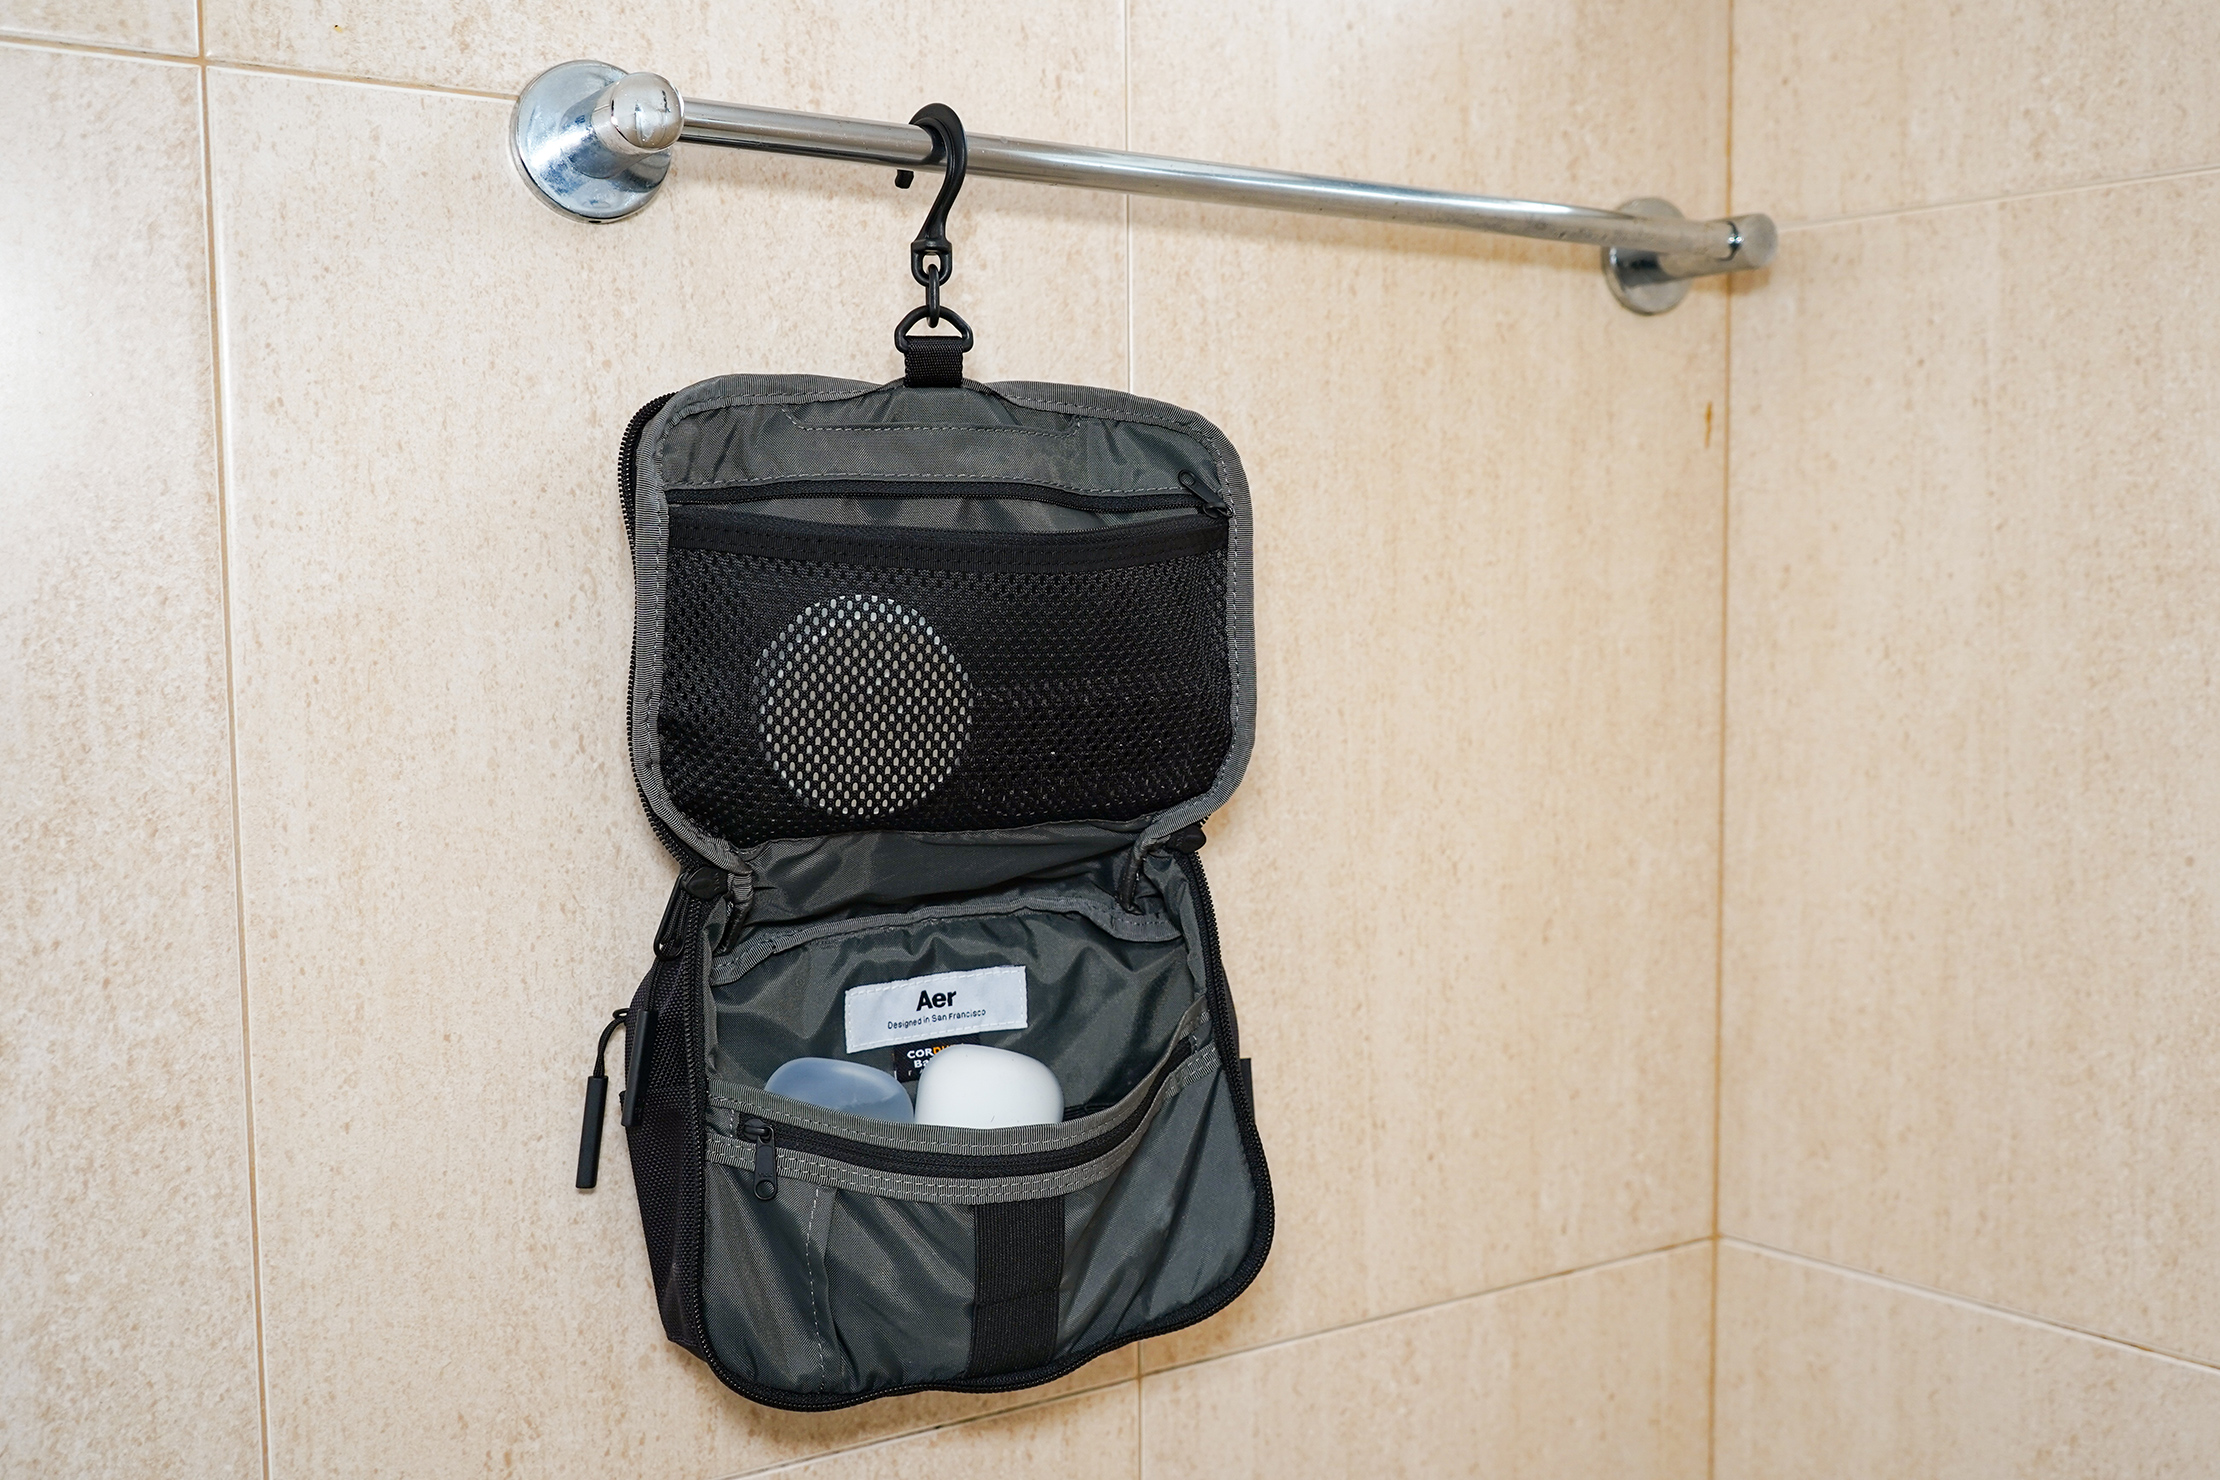 Aer Travel Kit for Toiletries | Review: 8.4/10 | Pack Hacker